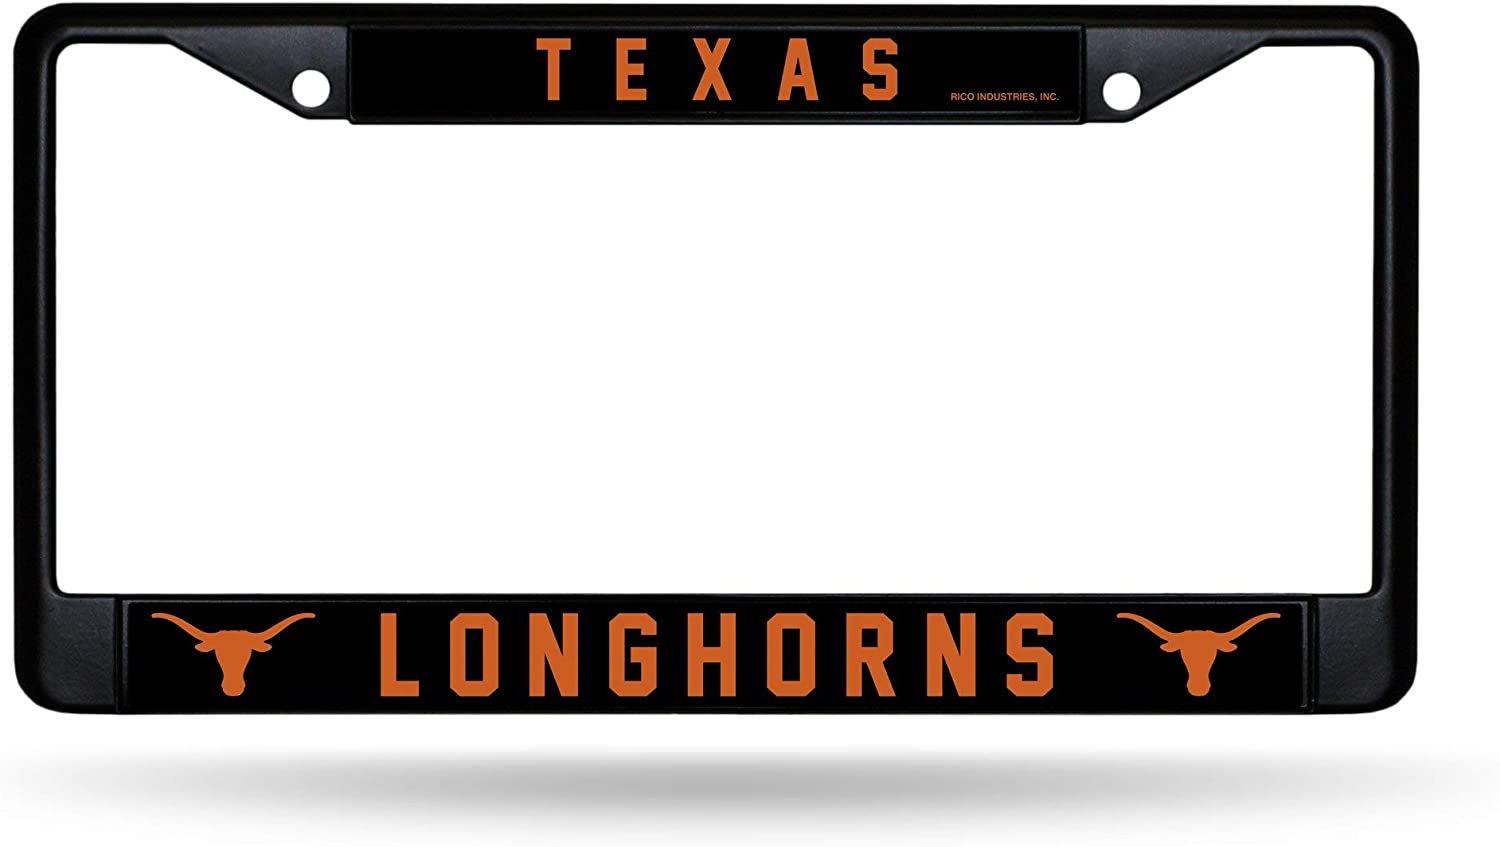 University of Texas Longhorns Black License Plate Frame Tag Cover 6 x 12 Inches